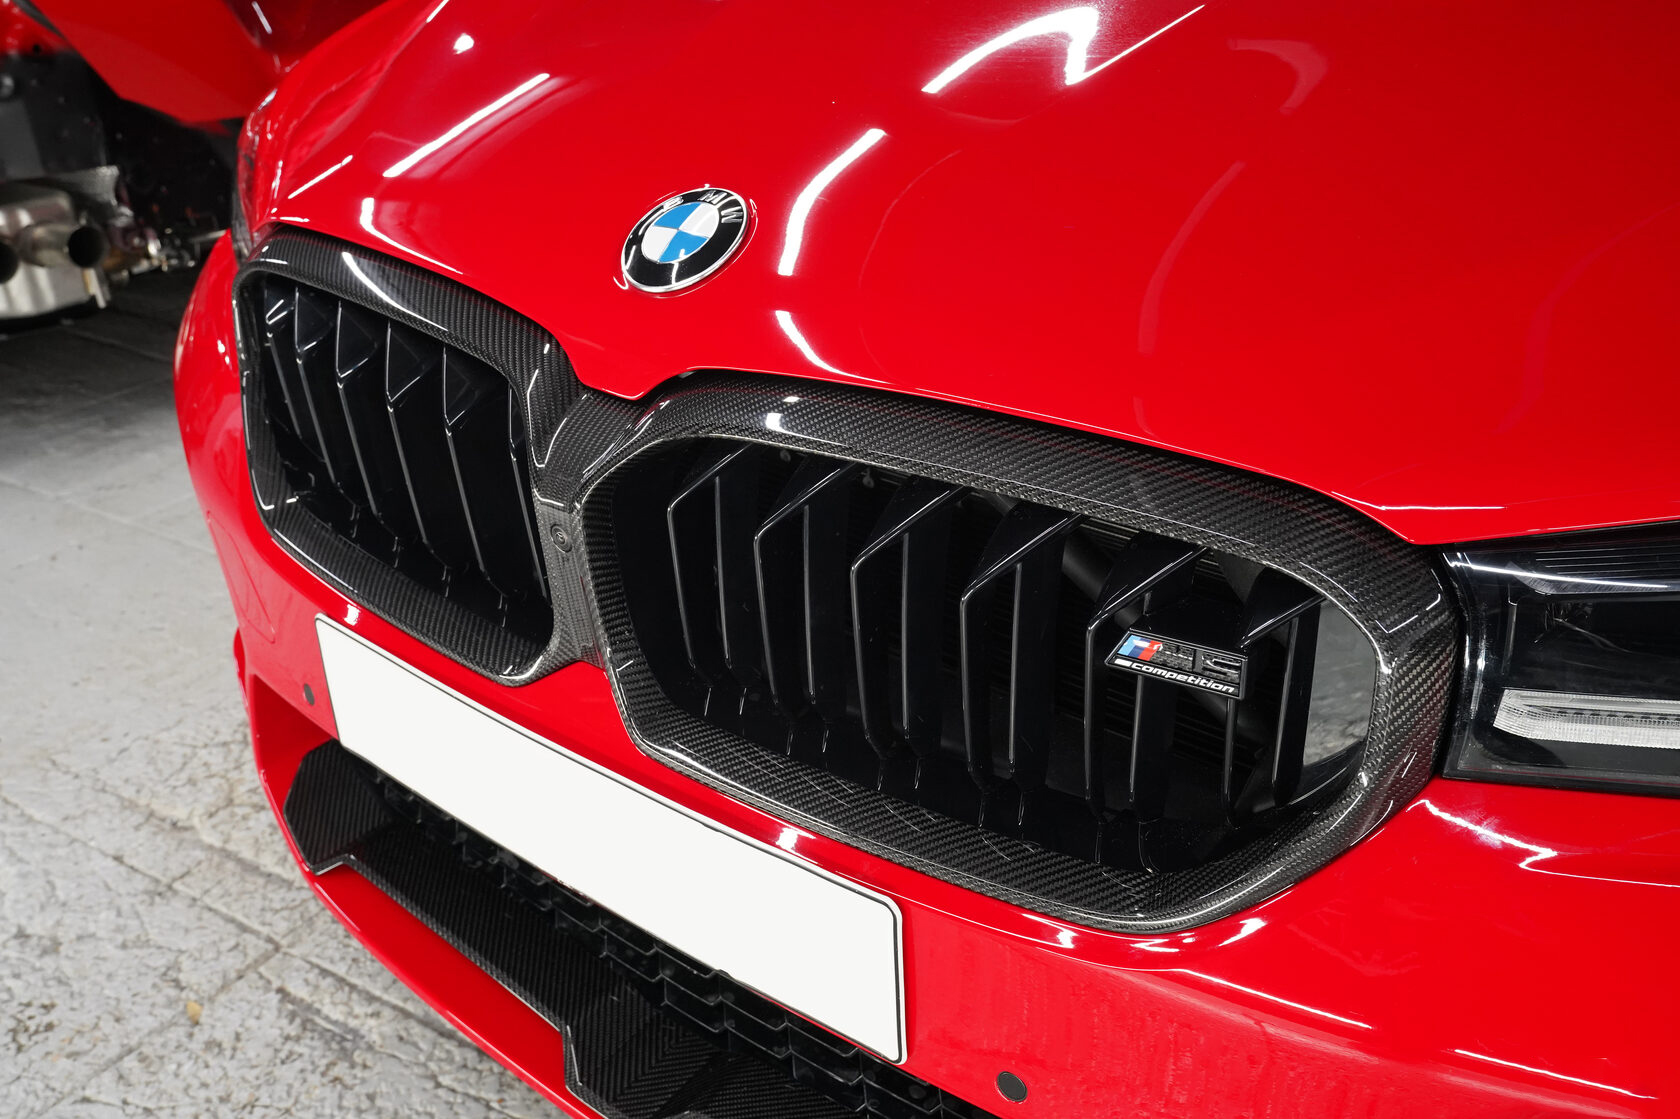 Radiator grille Sport Tech Carbon for BMW M5 F90 LCI Restyling